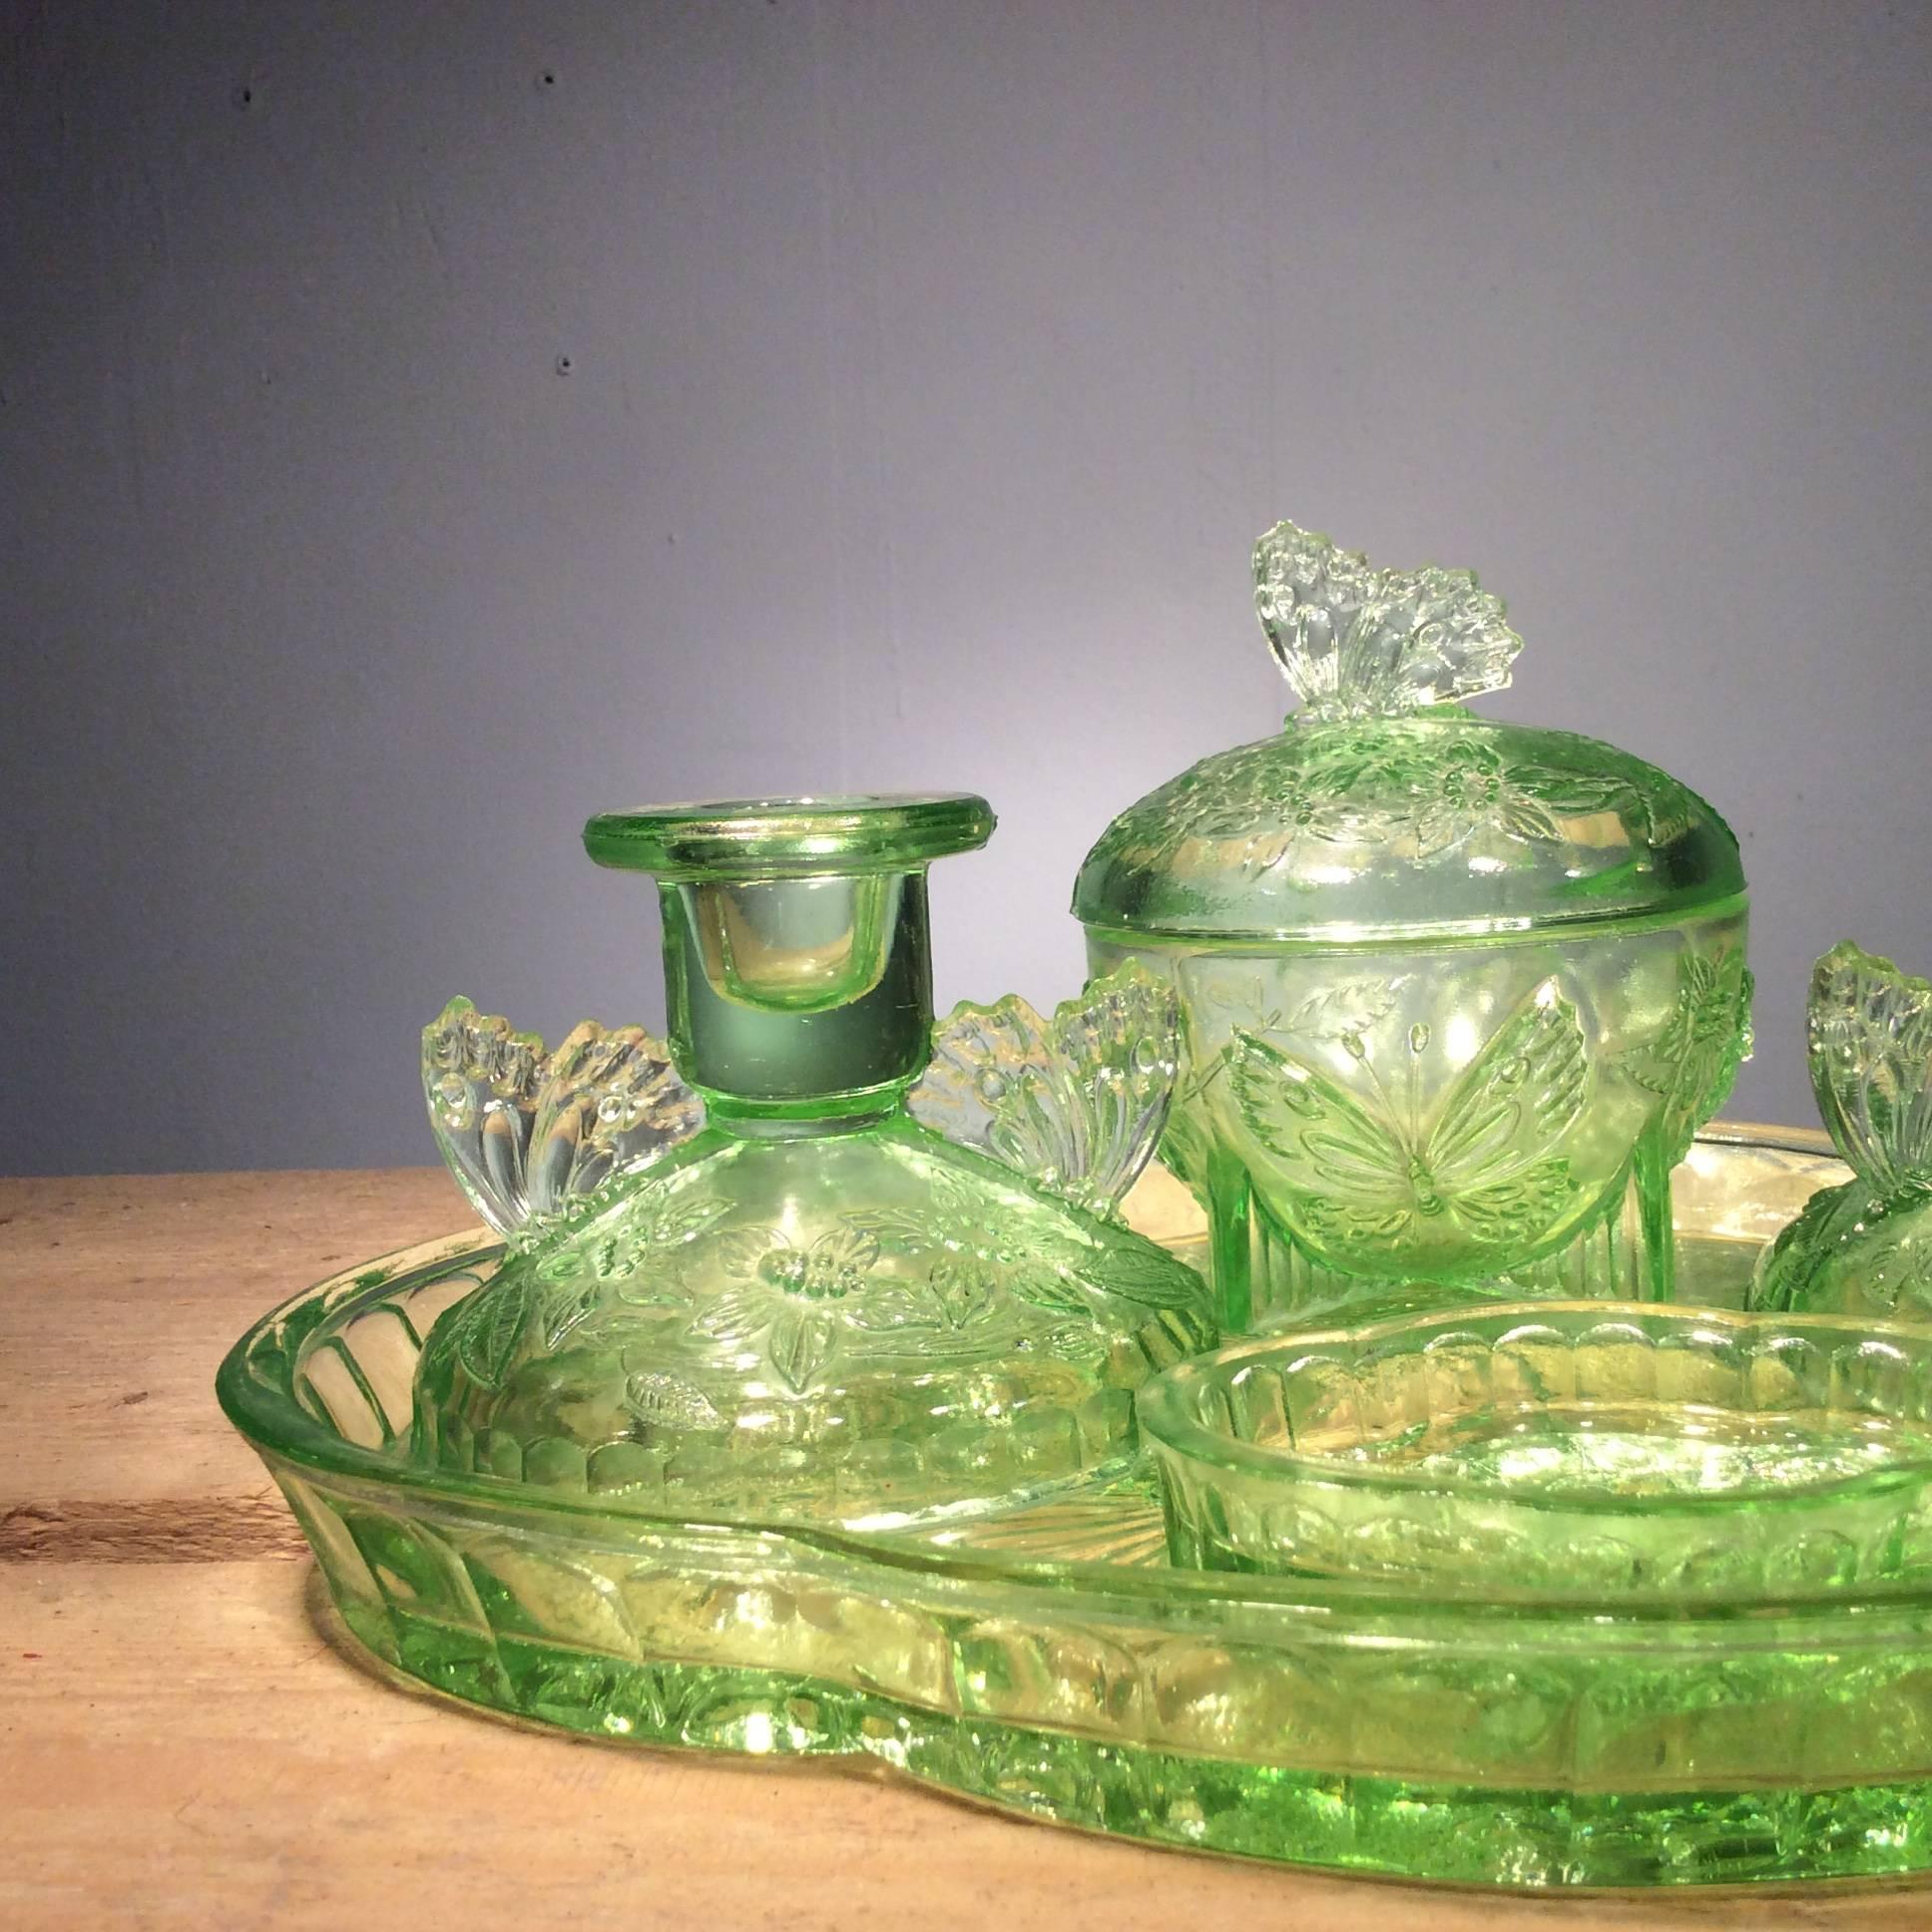 Green glass dressing table set adorned with butterflies and floral motifs. The set comes with a tray, a pair of candlesticks, a large lidded pot and a ring dish.

Dimensions:

Ring dish: Length 9 cm, width 6.5 cm.

Candlesticks: Height 8 cm,